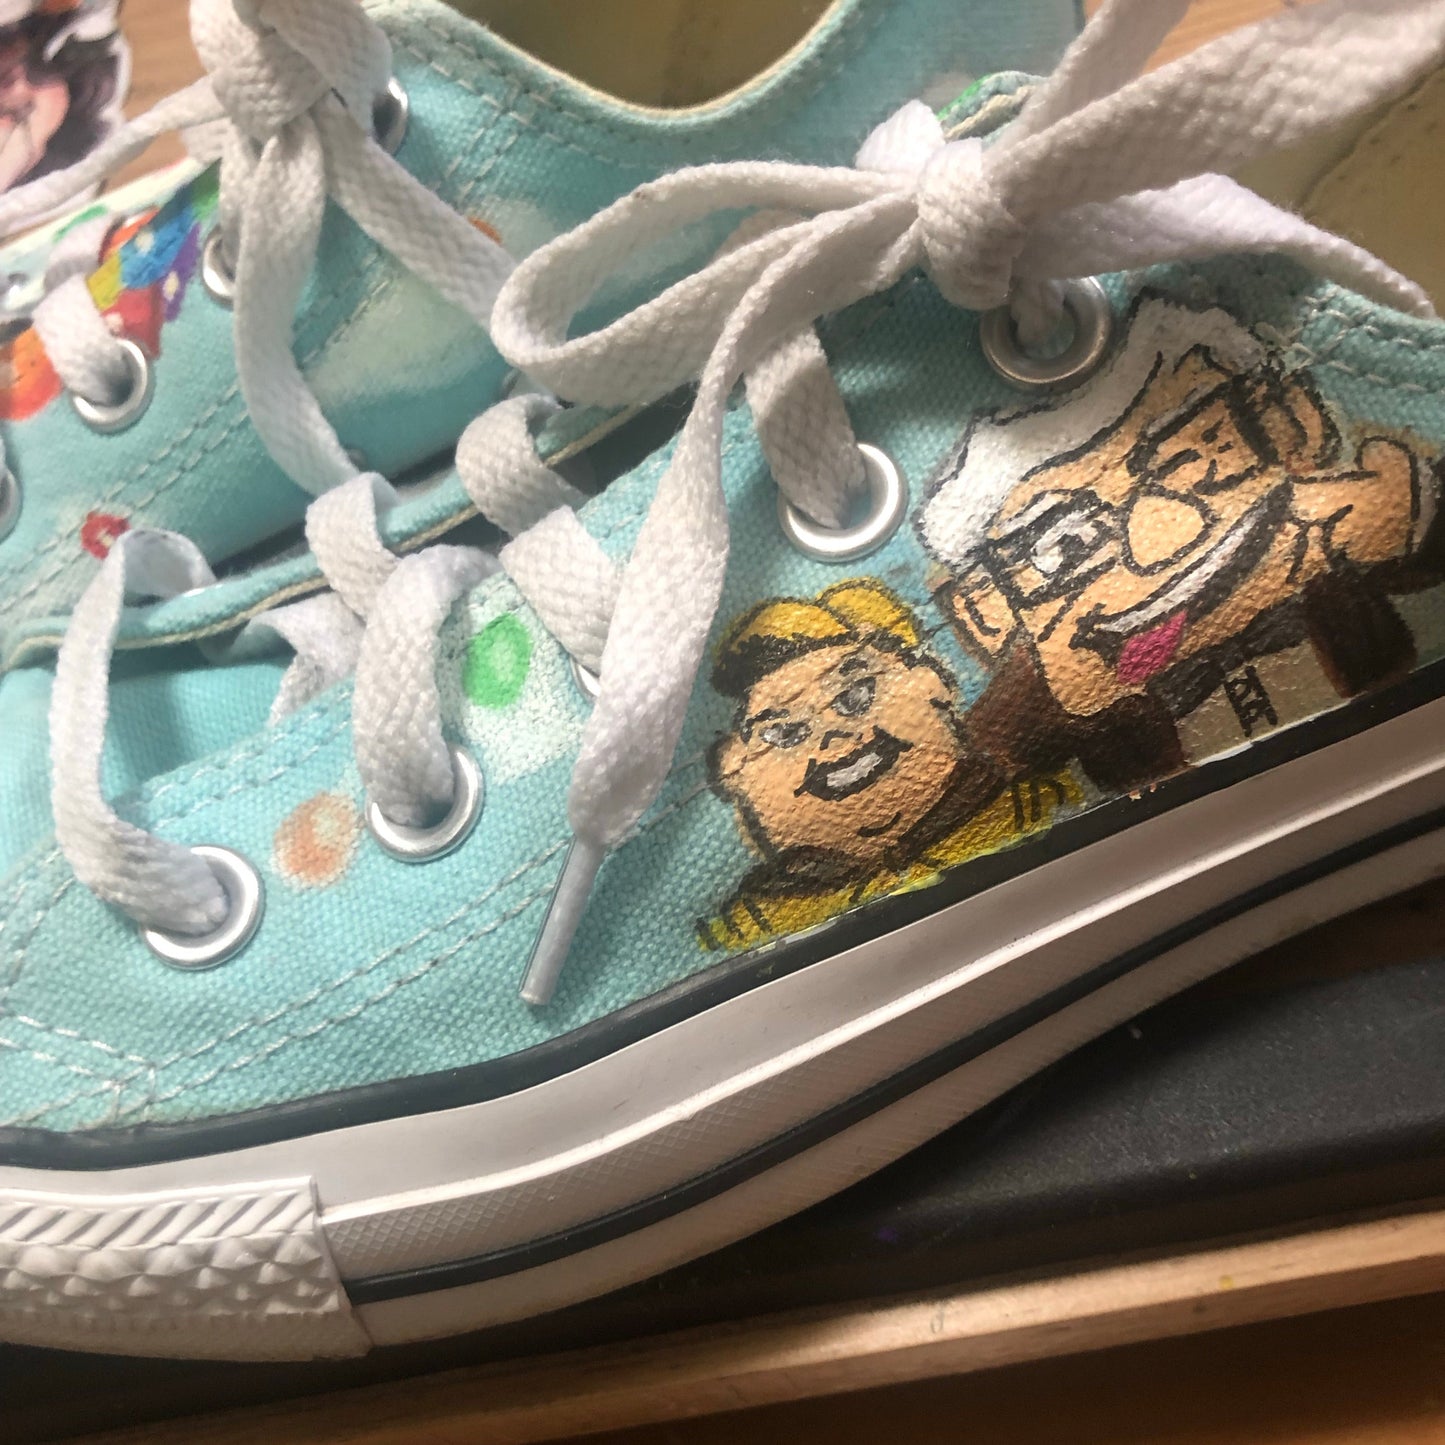 Custom Painted Shoes